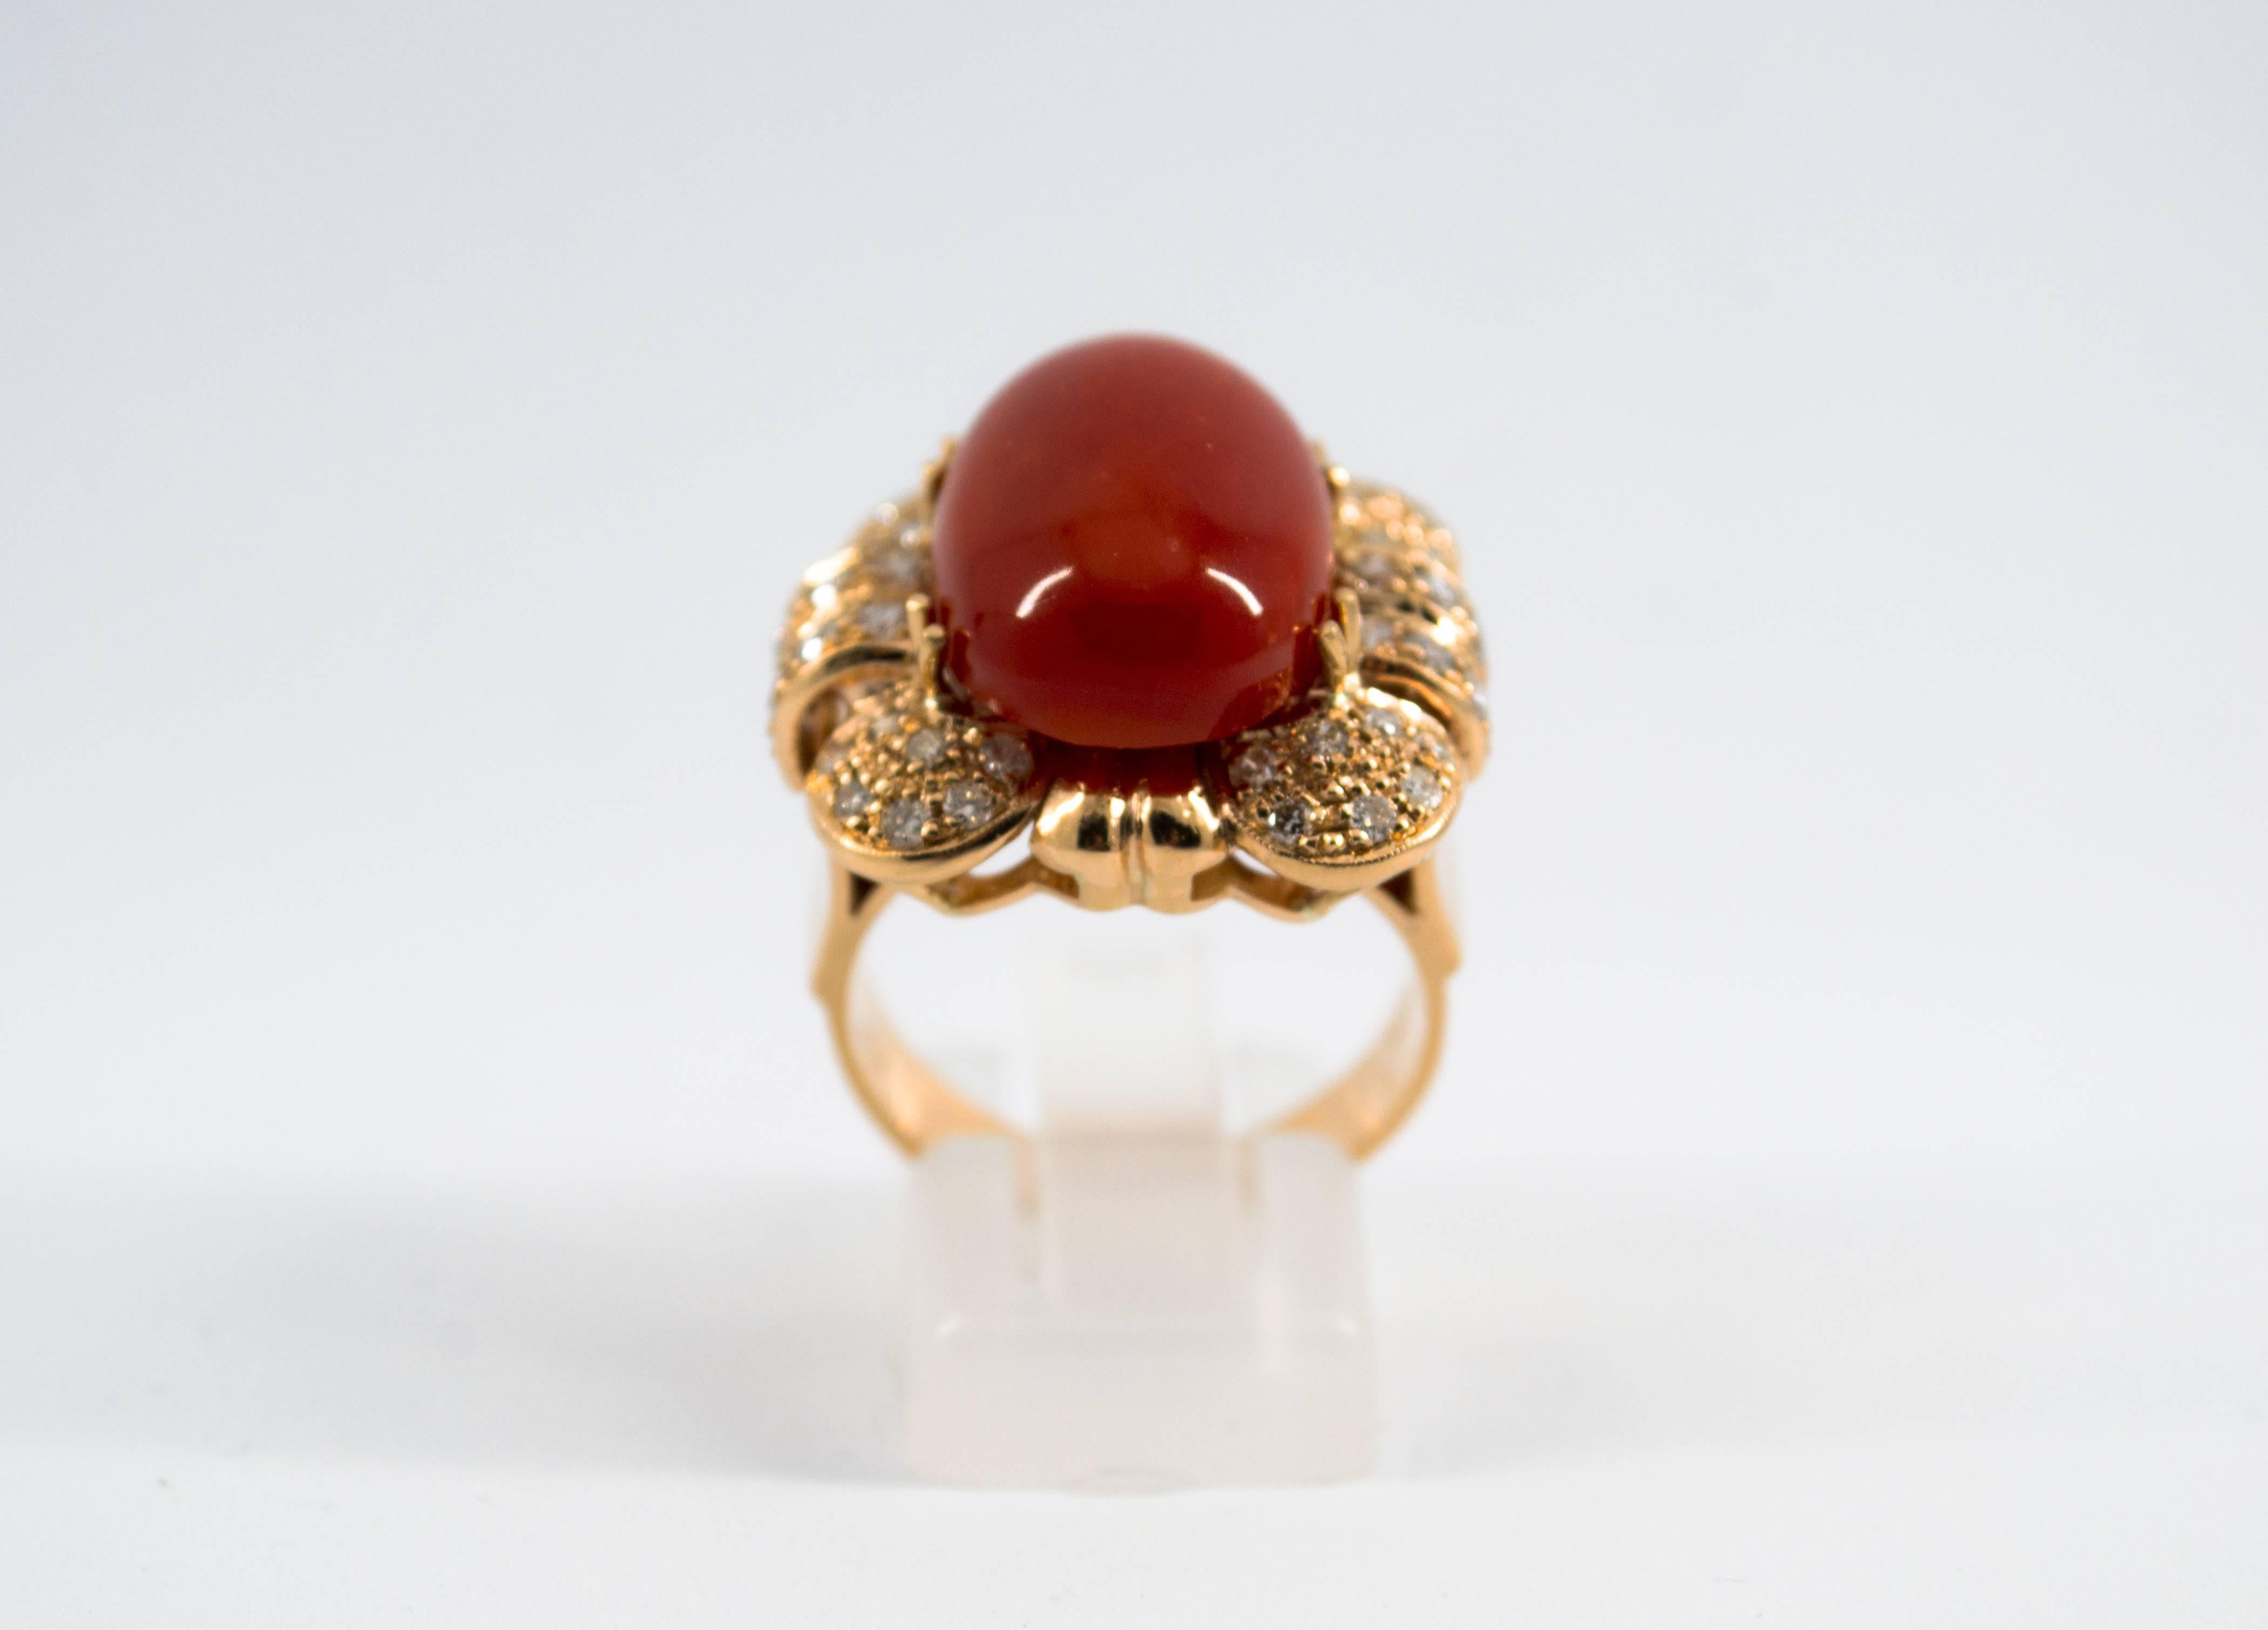 This Ring is made of 14K Yellow Gold.
This Ring has 0.70 Carats of White Rose Cut Diamonds.
This Ring has Mediterranean (Sardinia, Italy) Red Coral.
Size ITA: 15 USA: 7
We're a workshop so every piece is handmade, customizable and resizable.